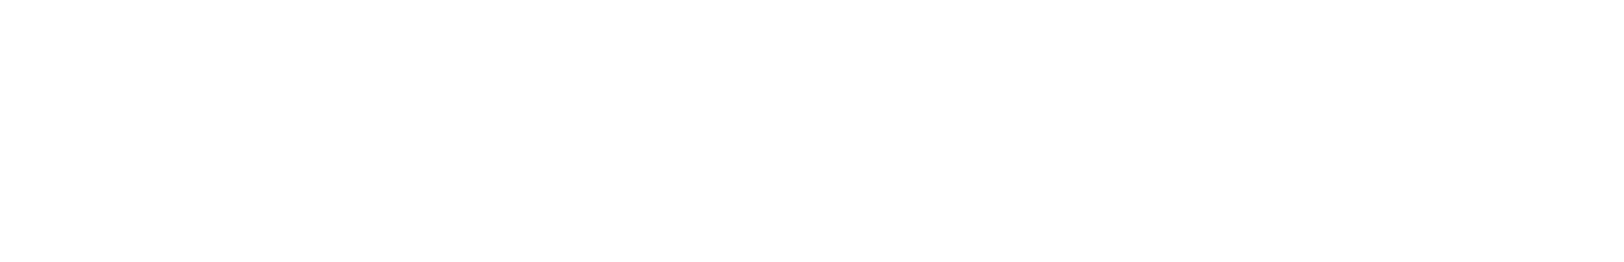 LVMHMoet Hennessy Louis Vuitton Market Value Exceeds 500B  video  Dailymotion